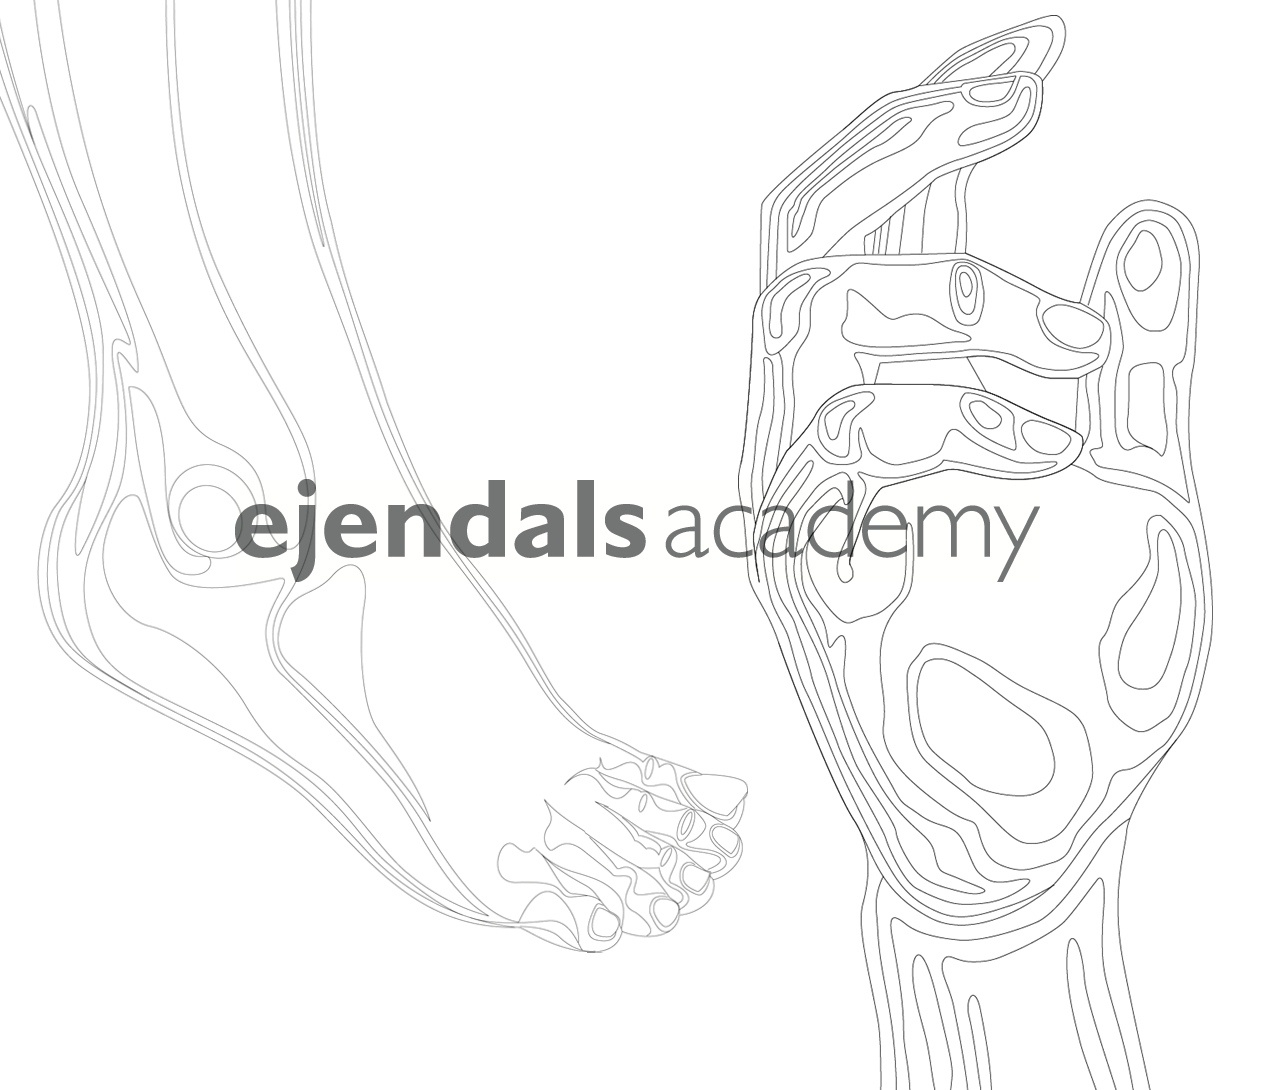 Ejendals Academy